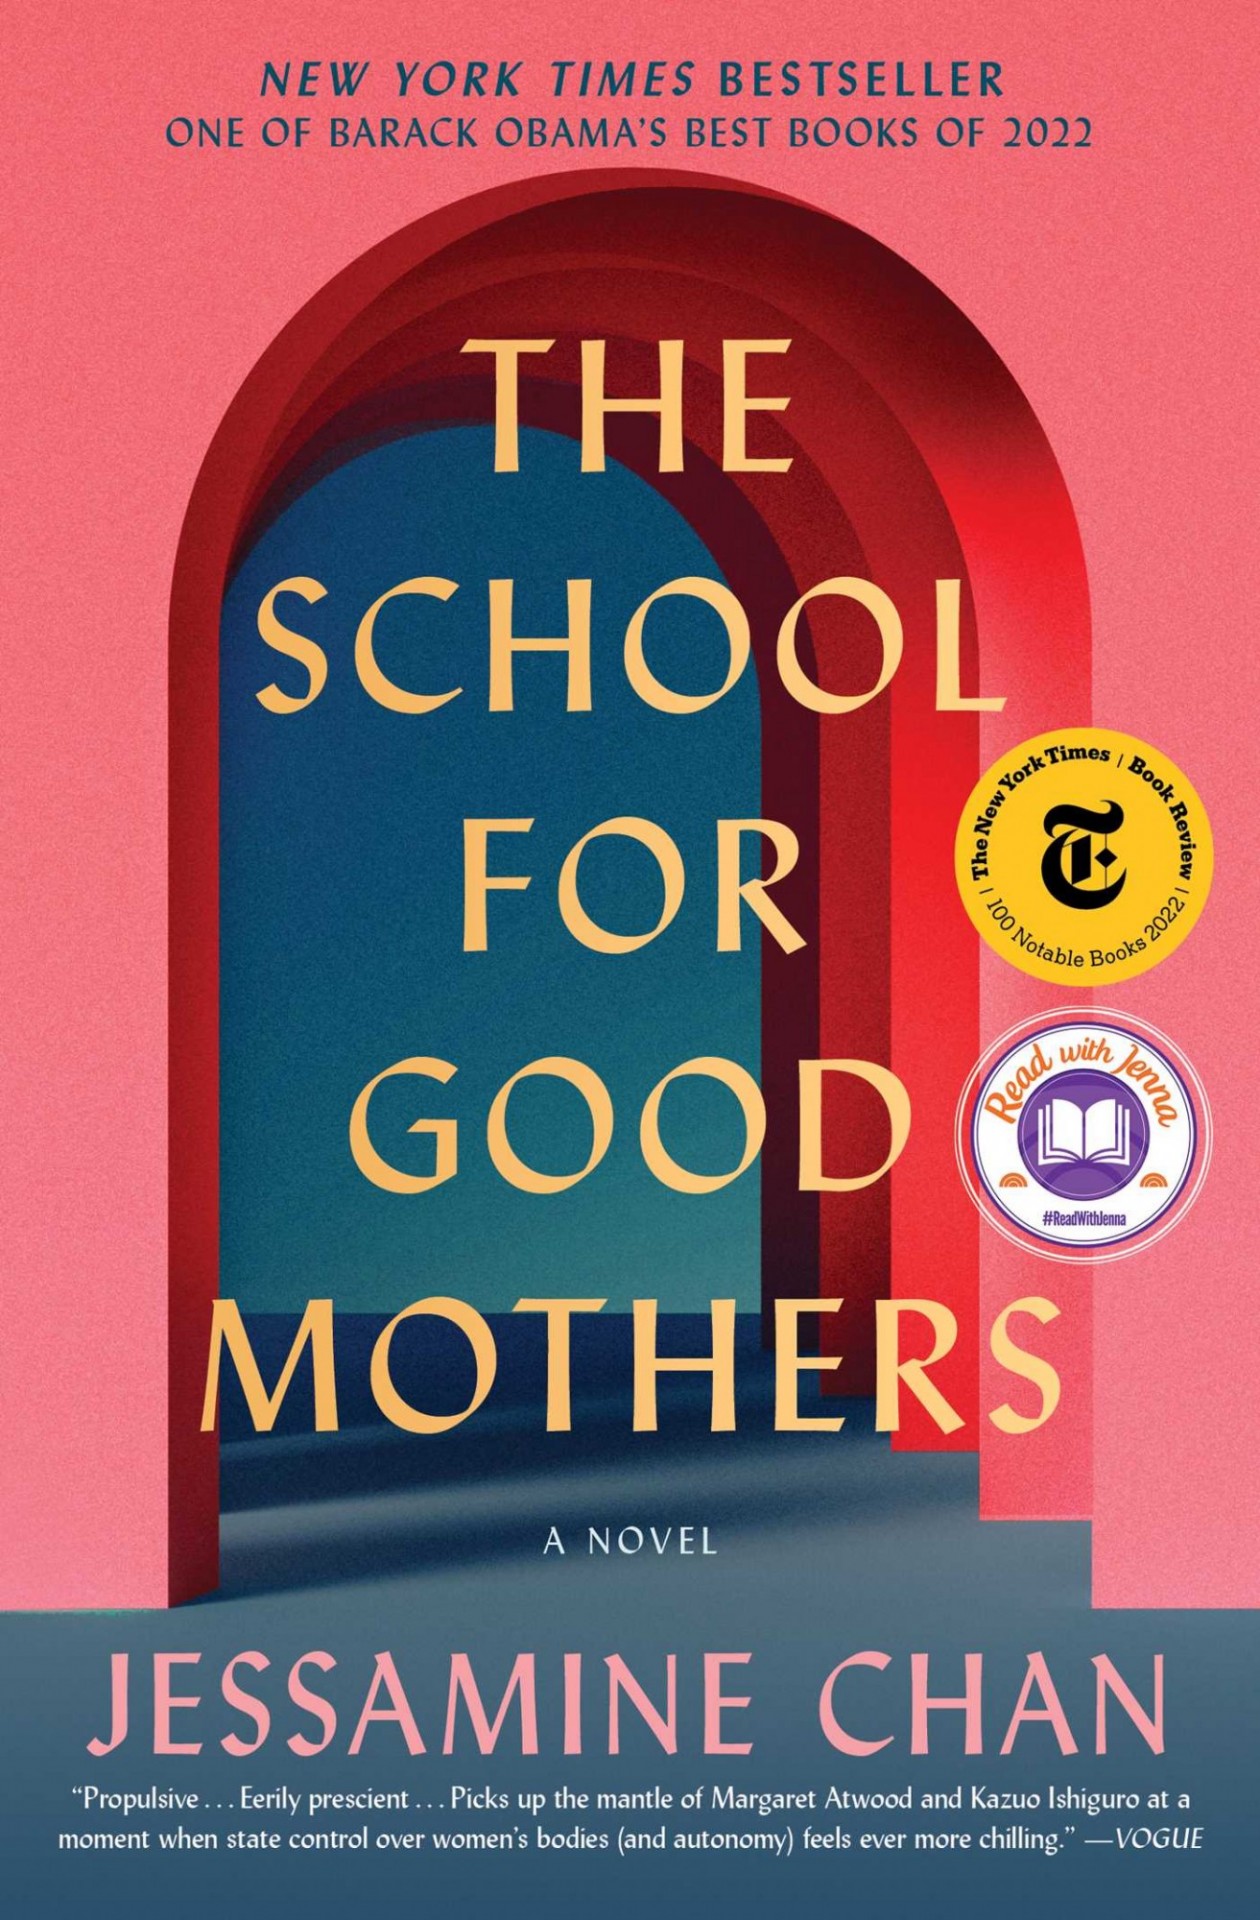 school for good mothers by jessamine chan